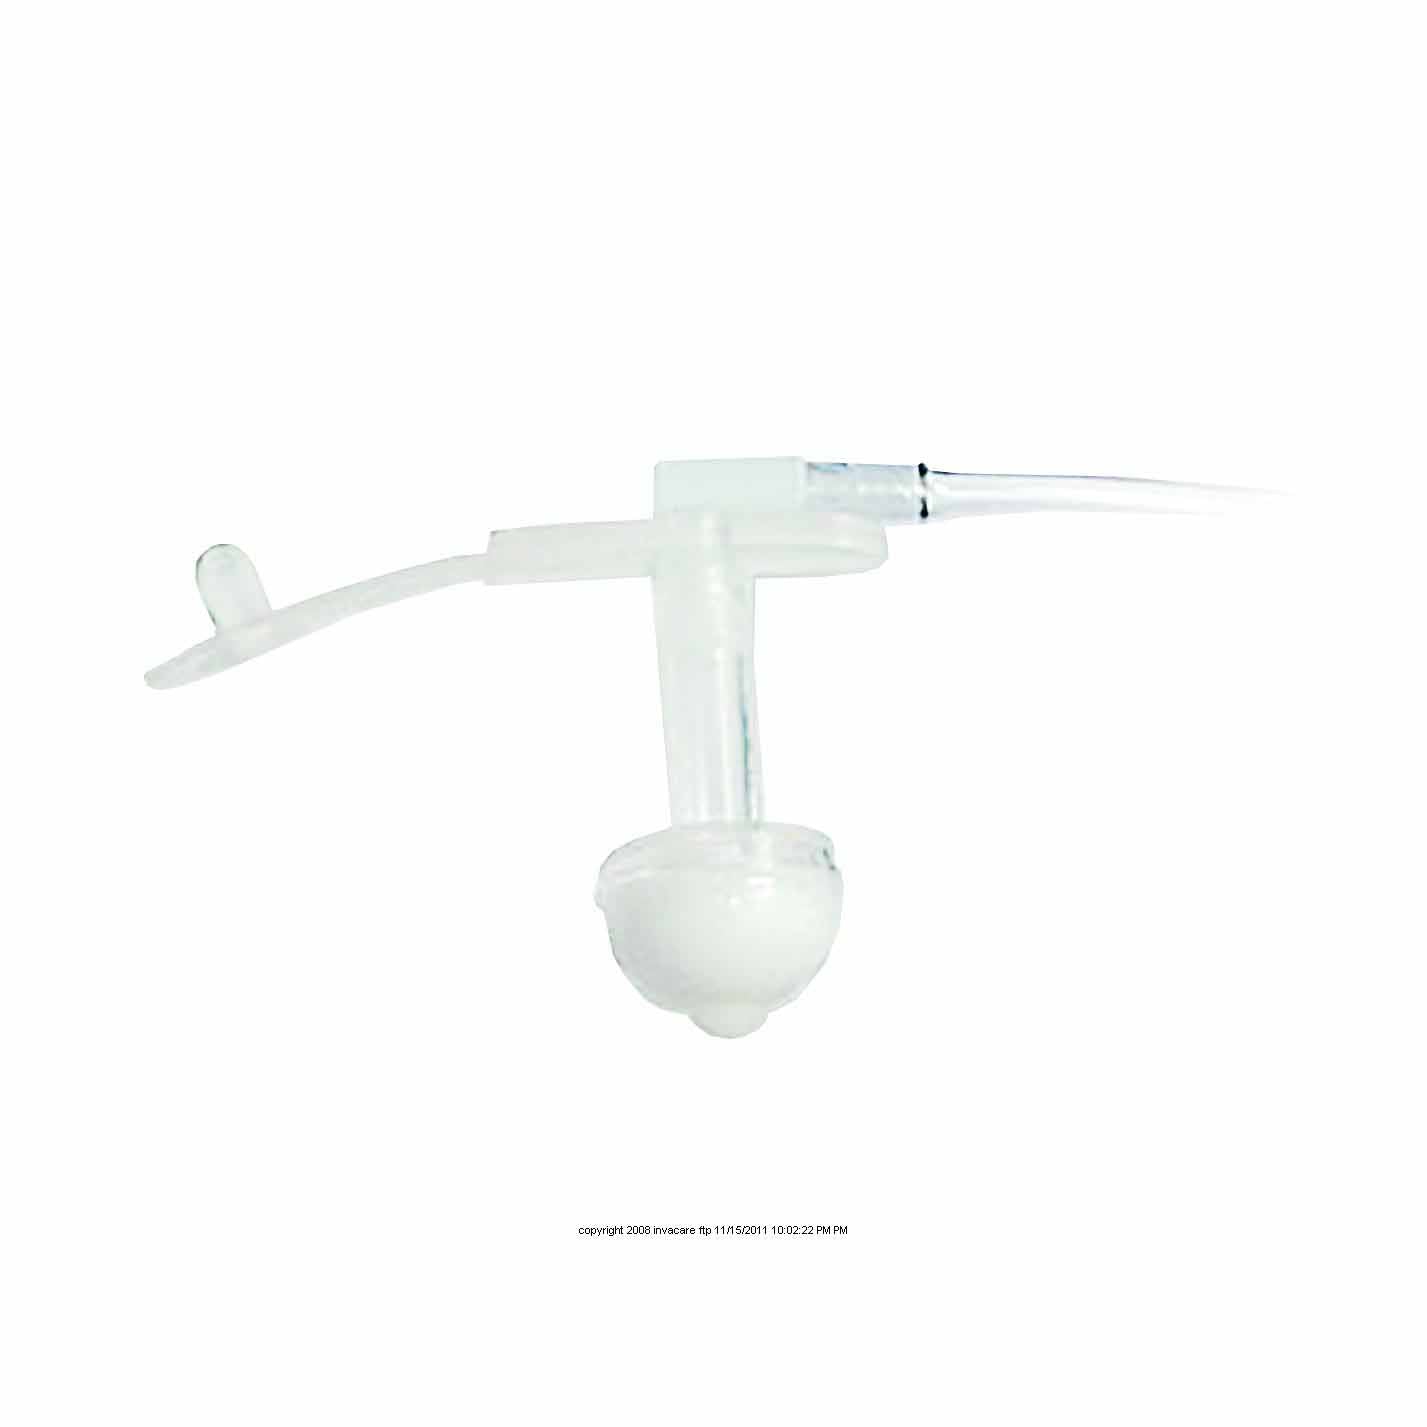 Bard® Button Replacement Gastronomy Device - (Sterile)